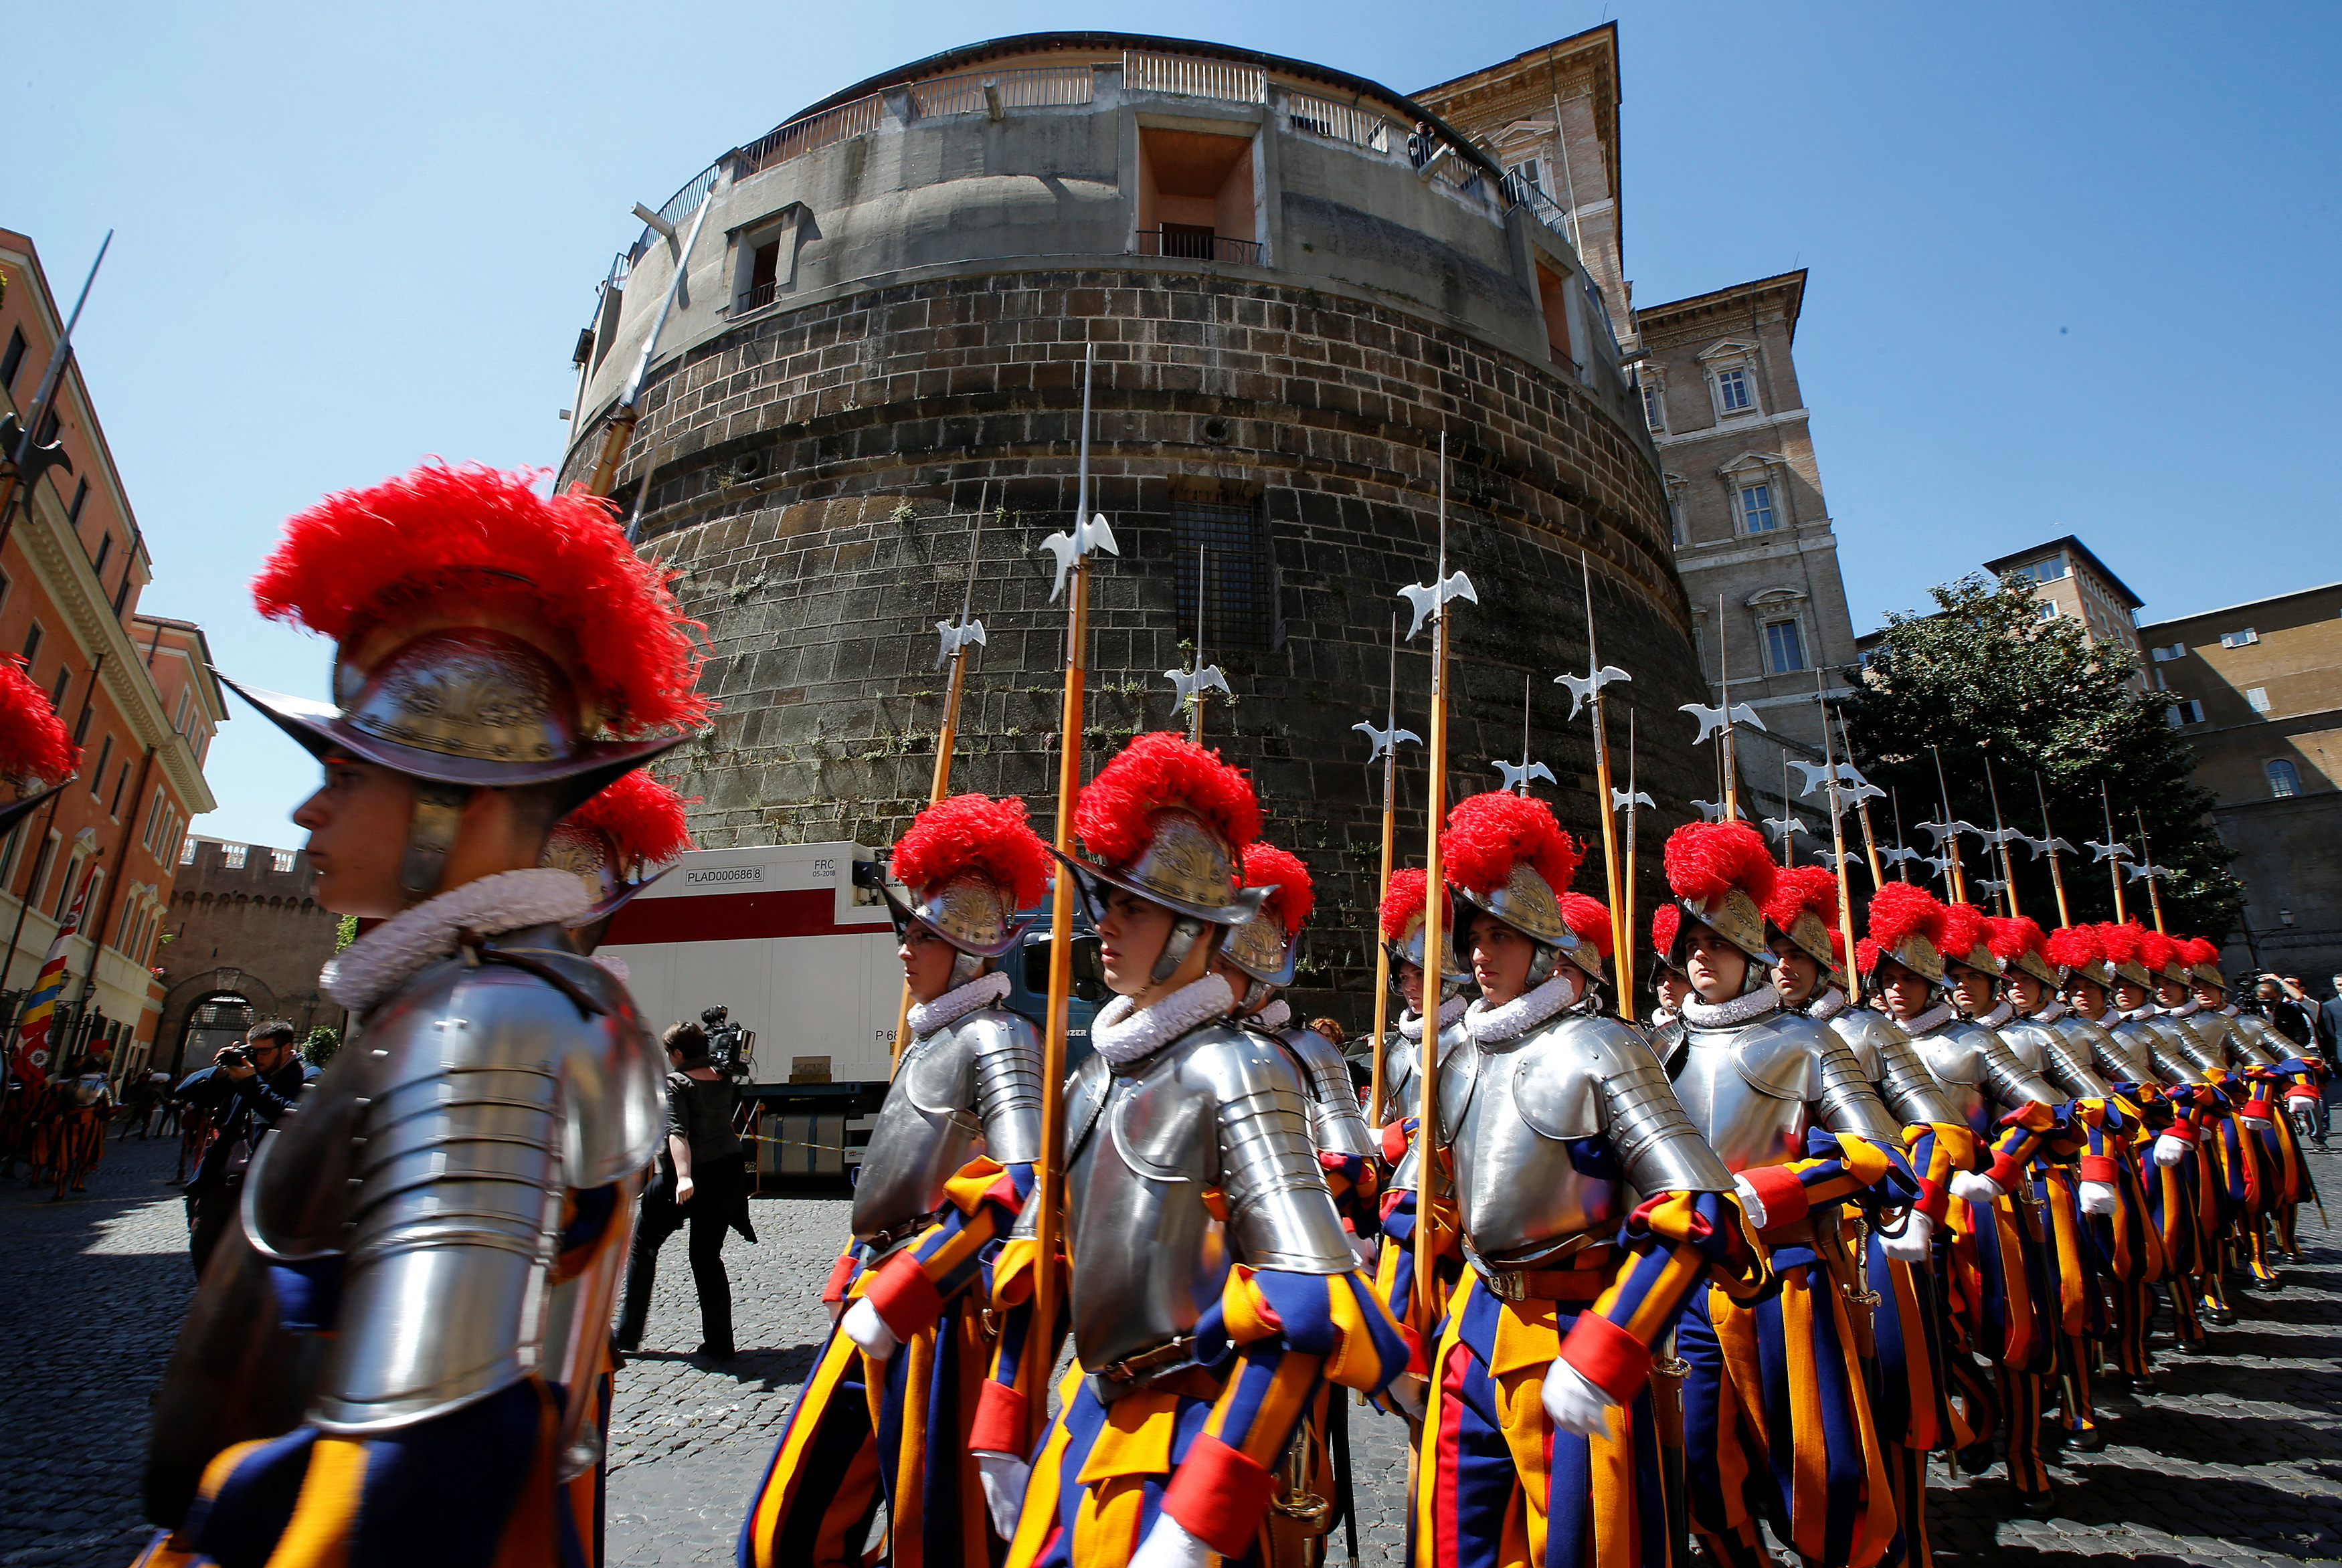 The Vatican's elite Swiss Guards march in front of the Vatican bank tower at the Vatican